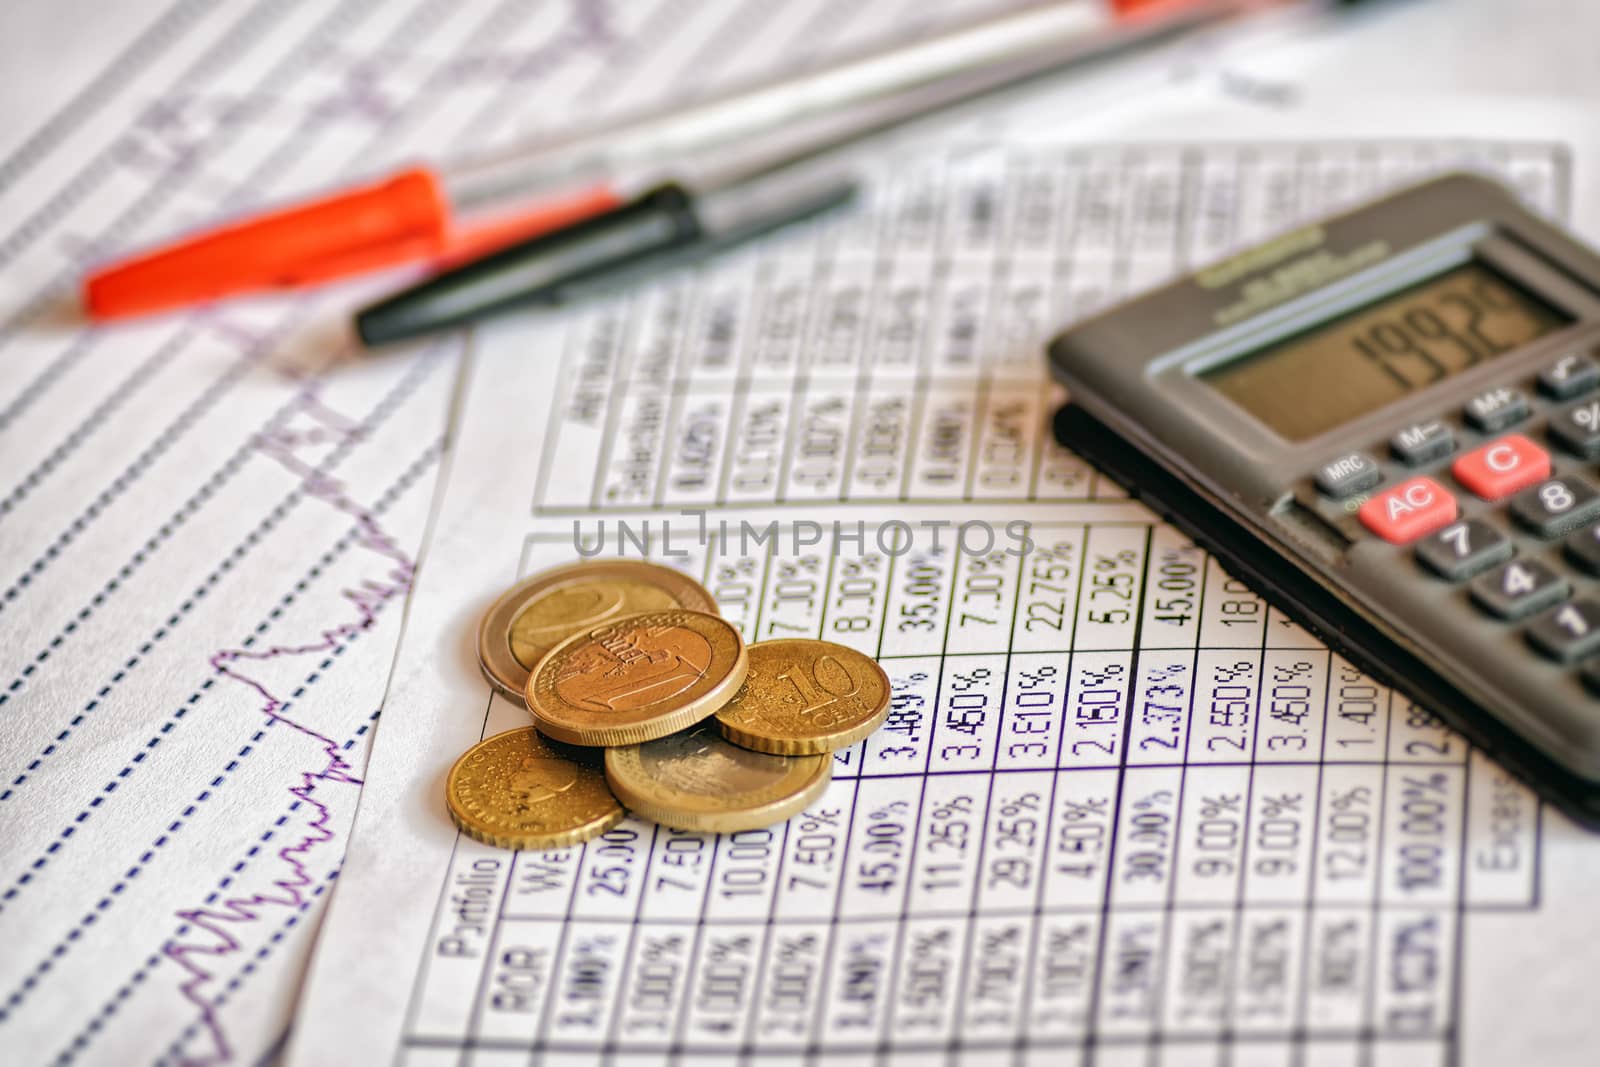 finance and statistics, euros, coins, graph, calculator by Bleshka